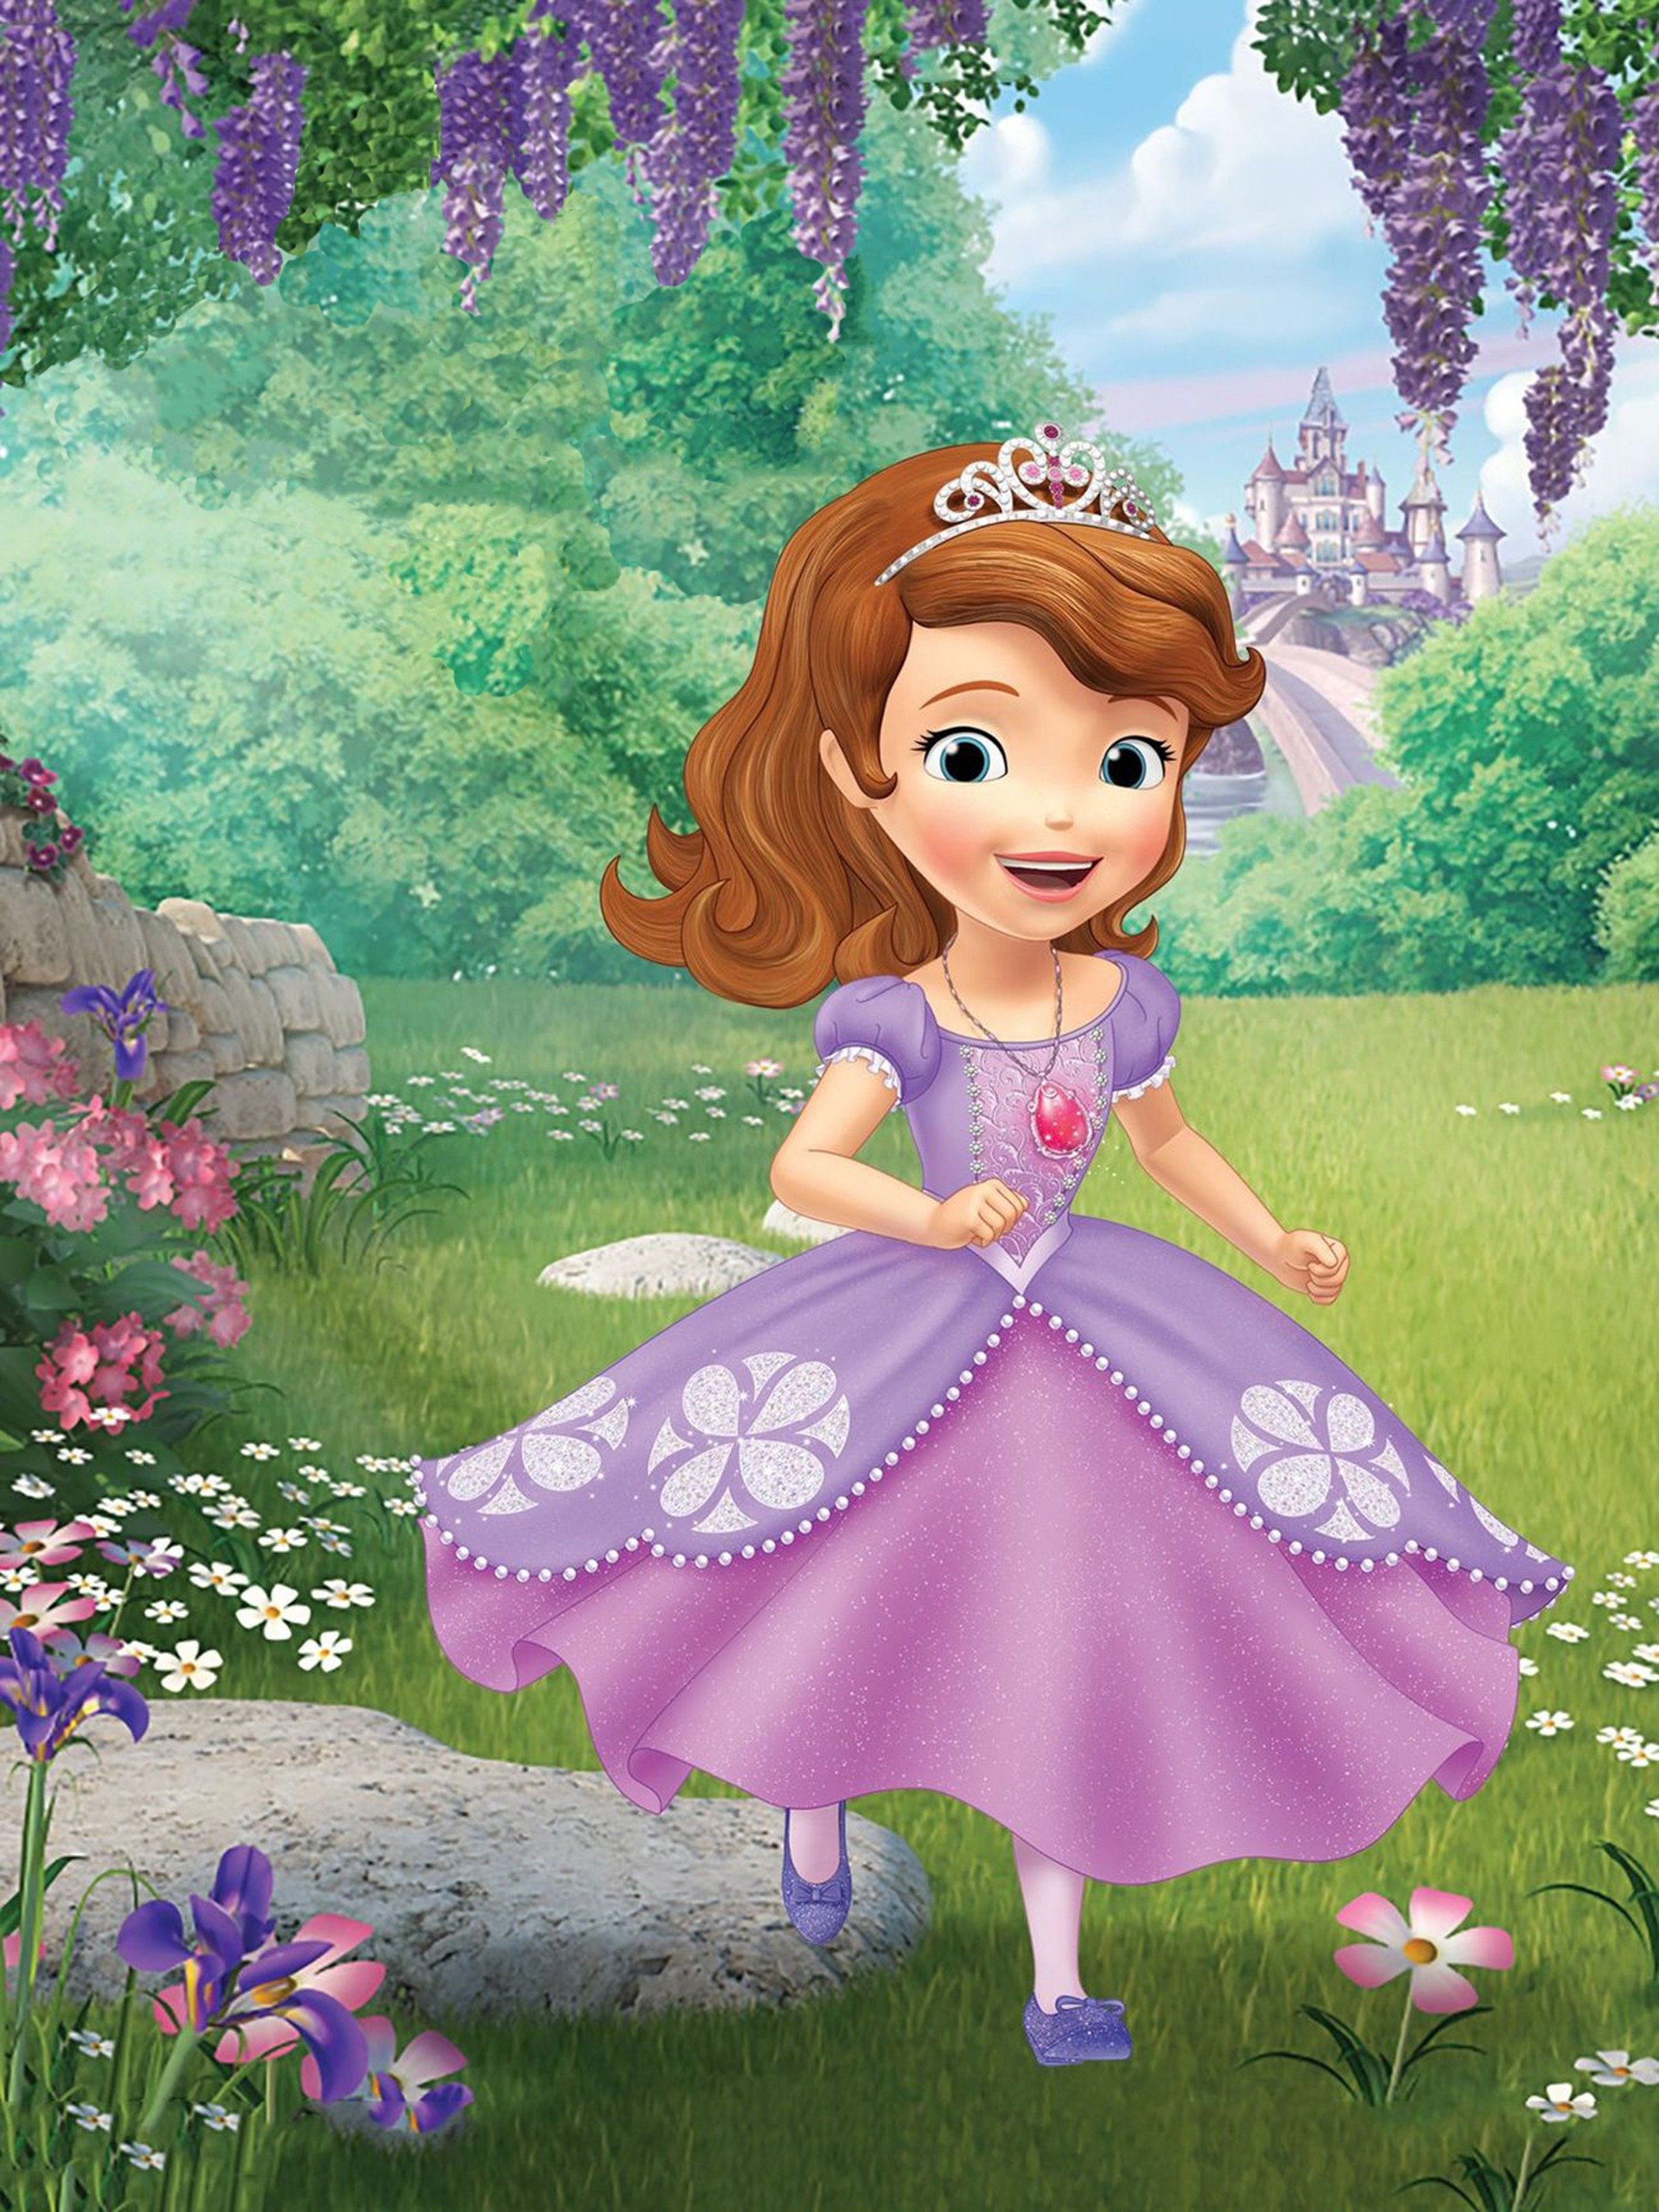 sofia the first download torrent